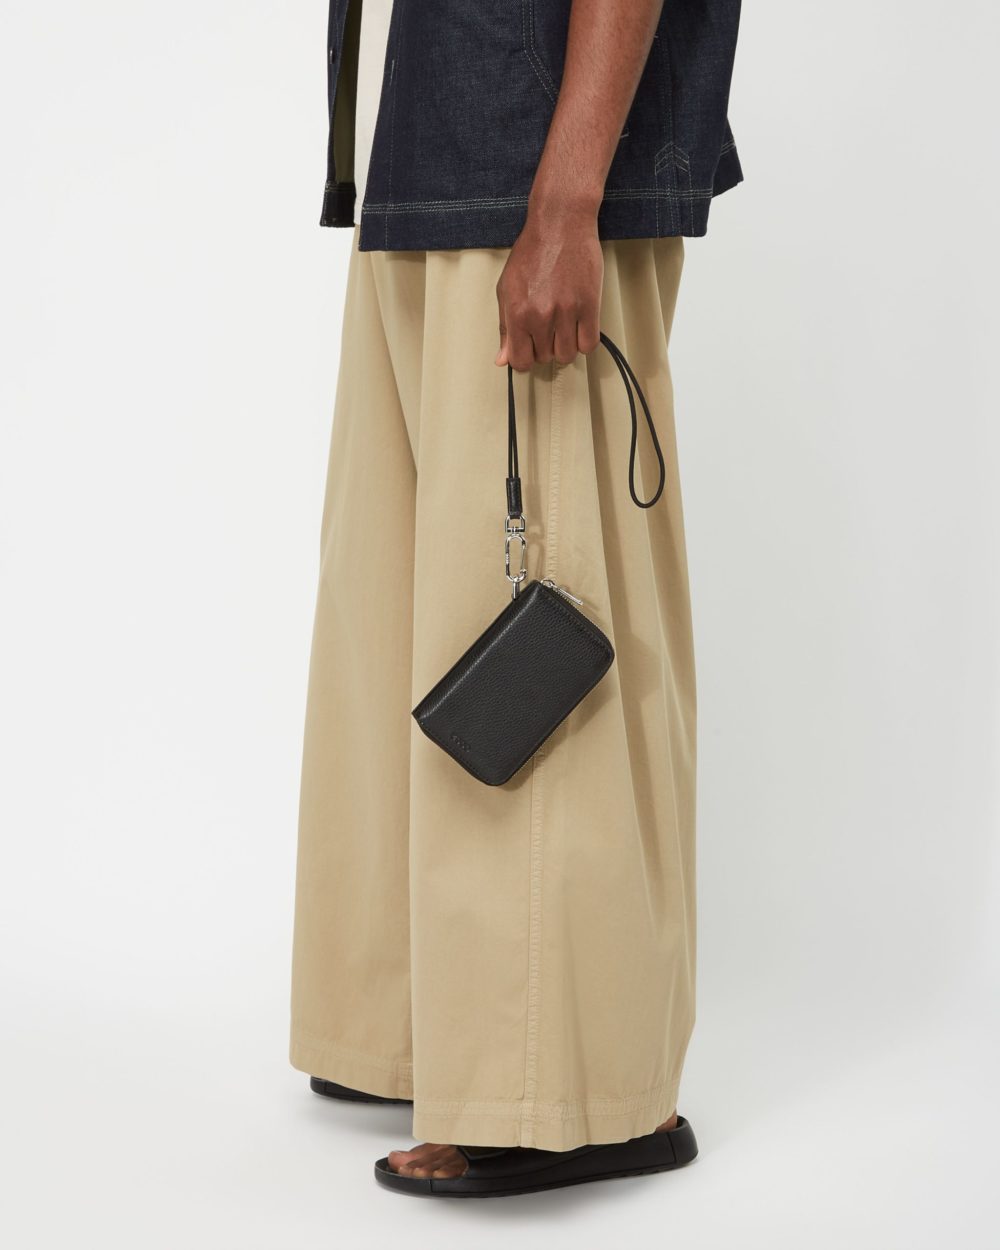 A lookbook fashion close up image featuring a man wearing a fashionable outfit holding a bag with his hand in front of a white background. Photographed by I Heart Studios.